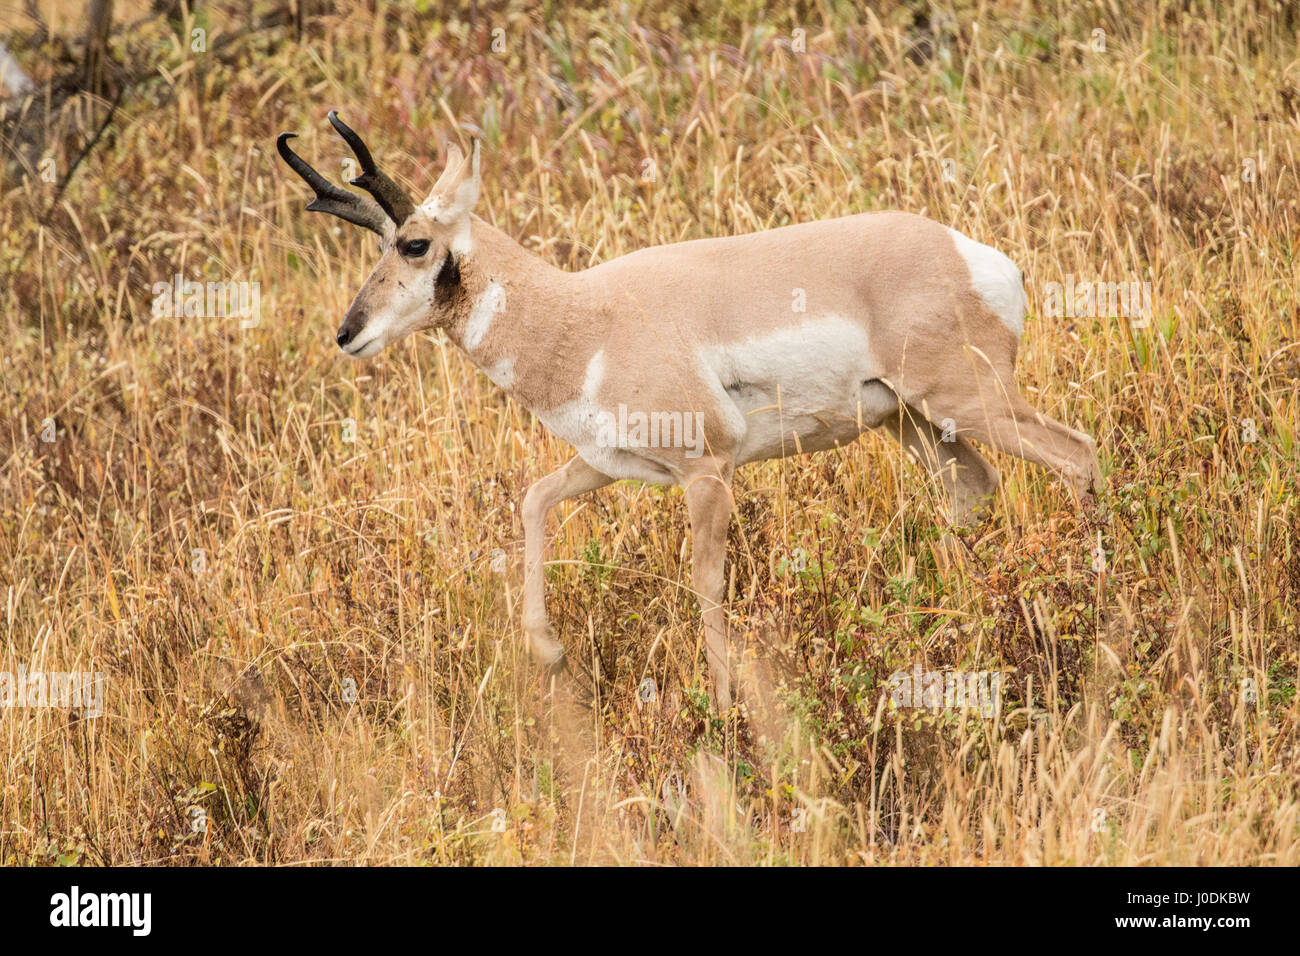 Pronghorn antelope walking in tall grass in Yellowstone National Park, Wyoming, USA Stock Photo